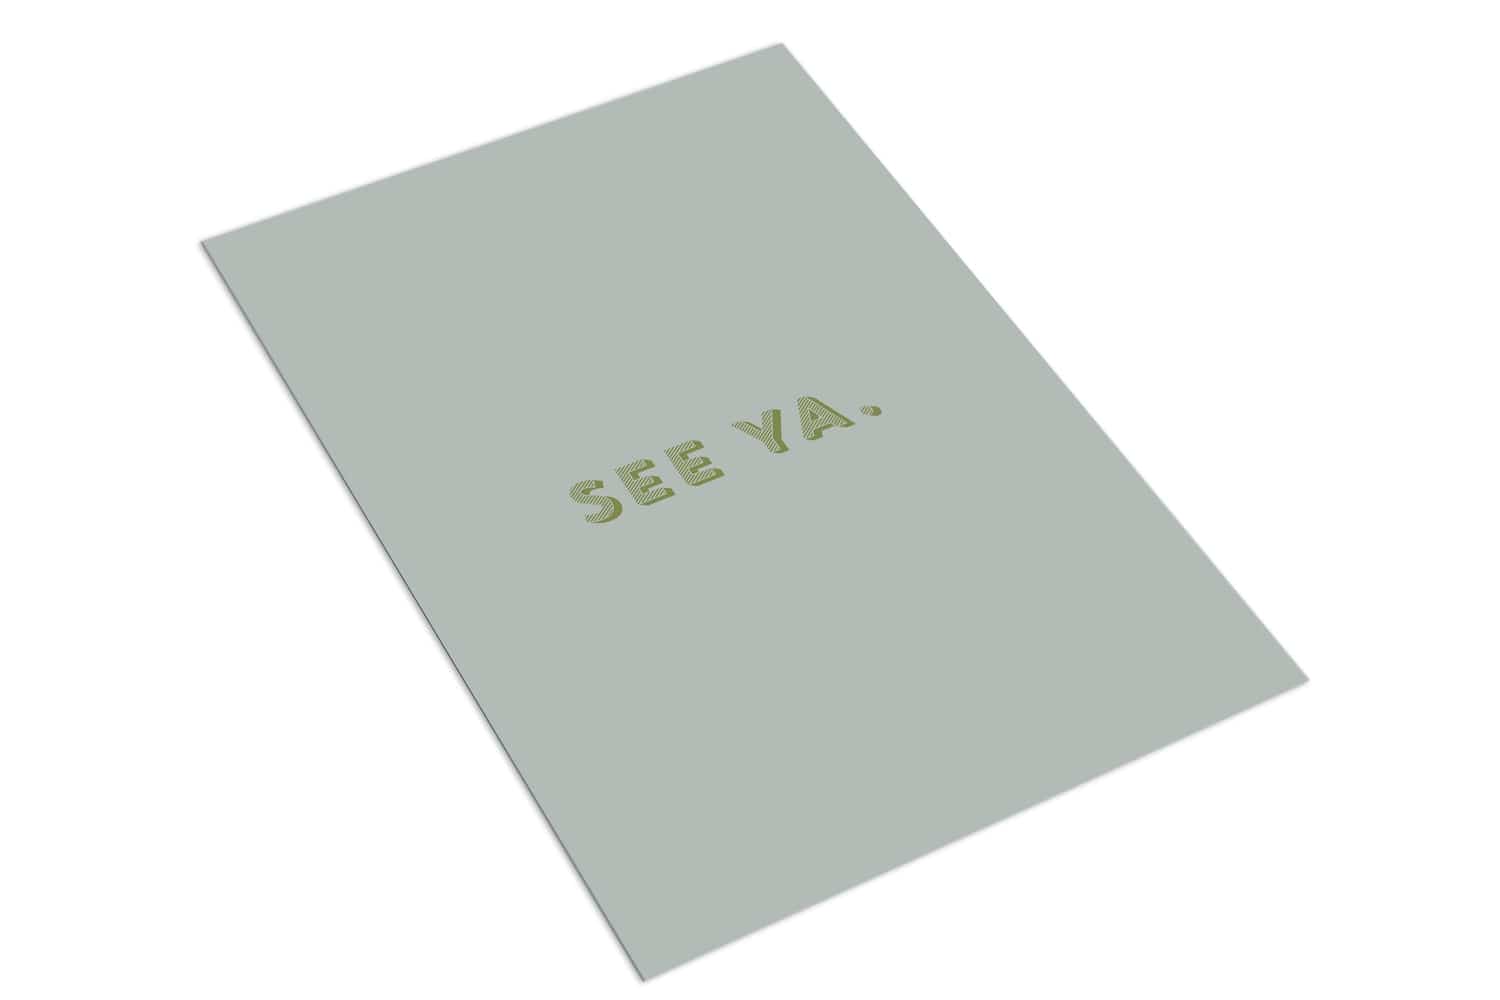 See Ya - The Paper People Greeting Cards